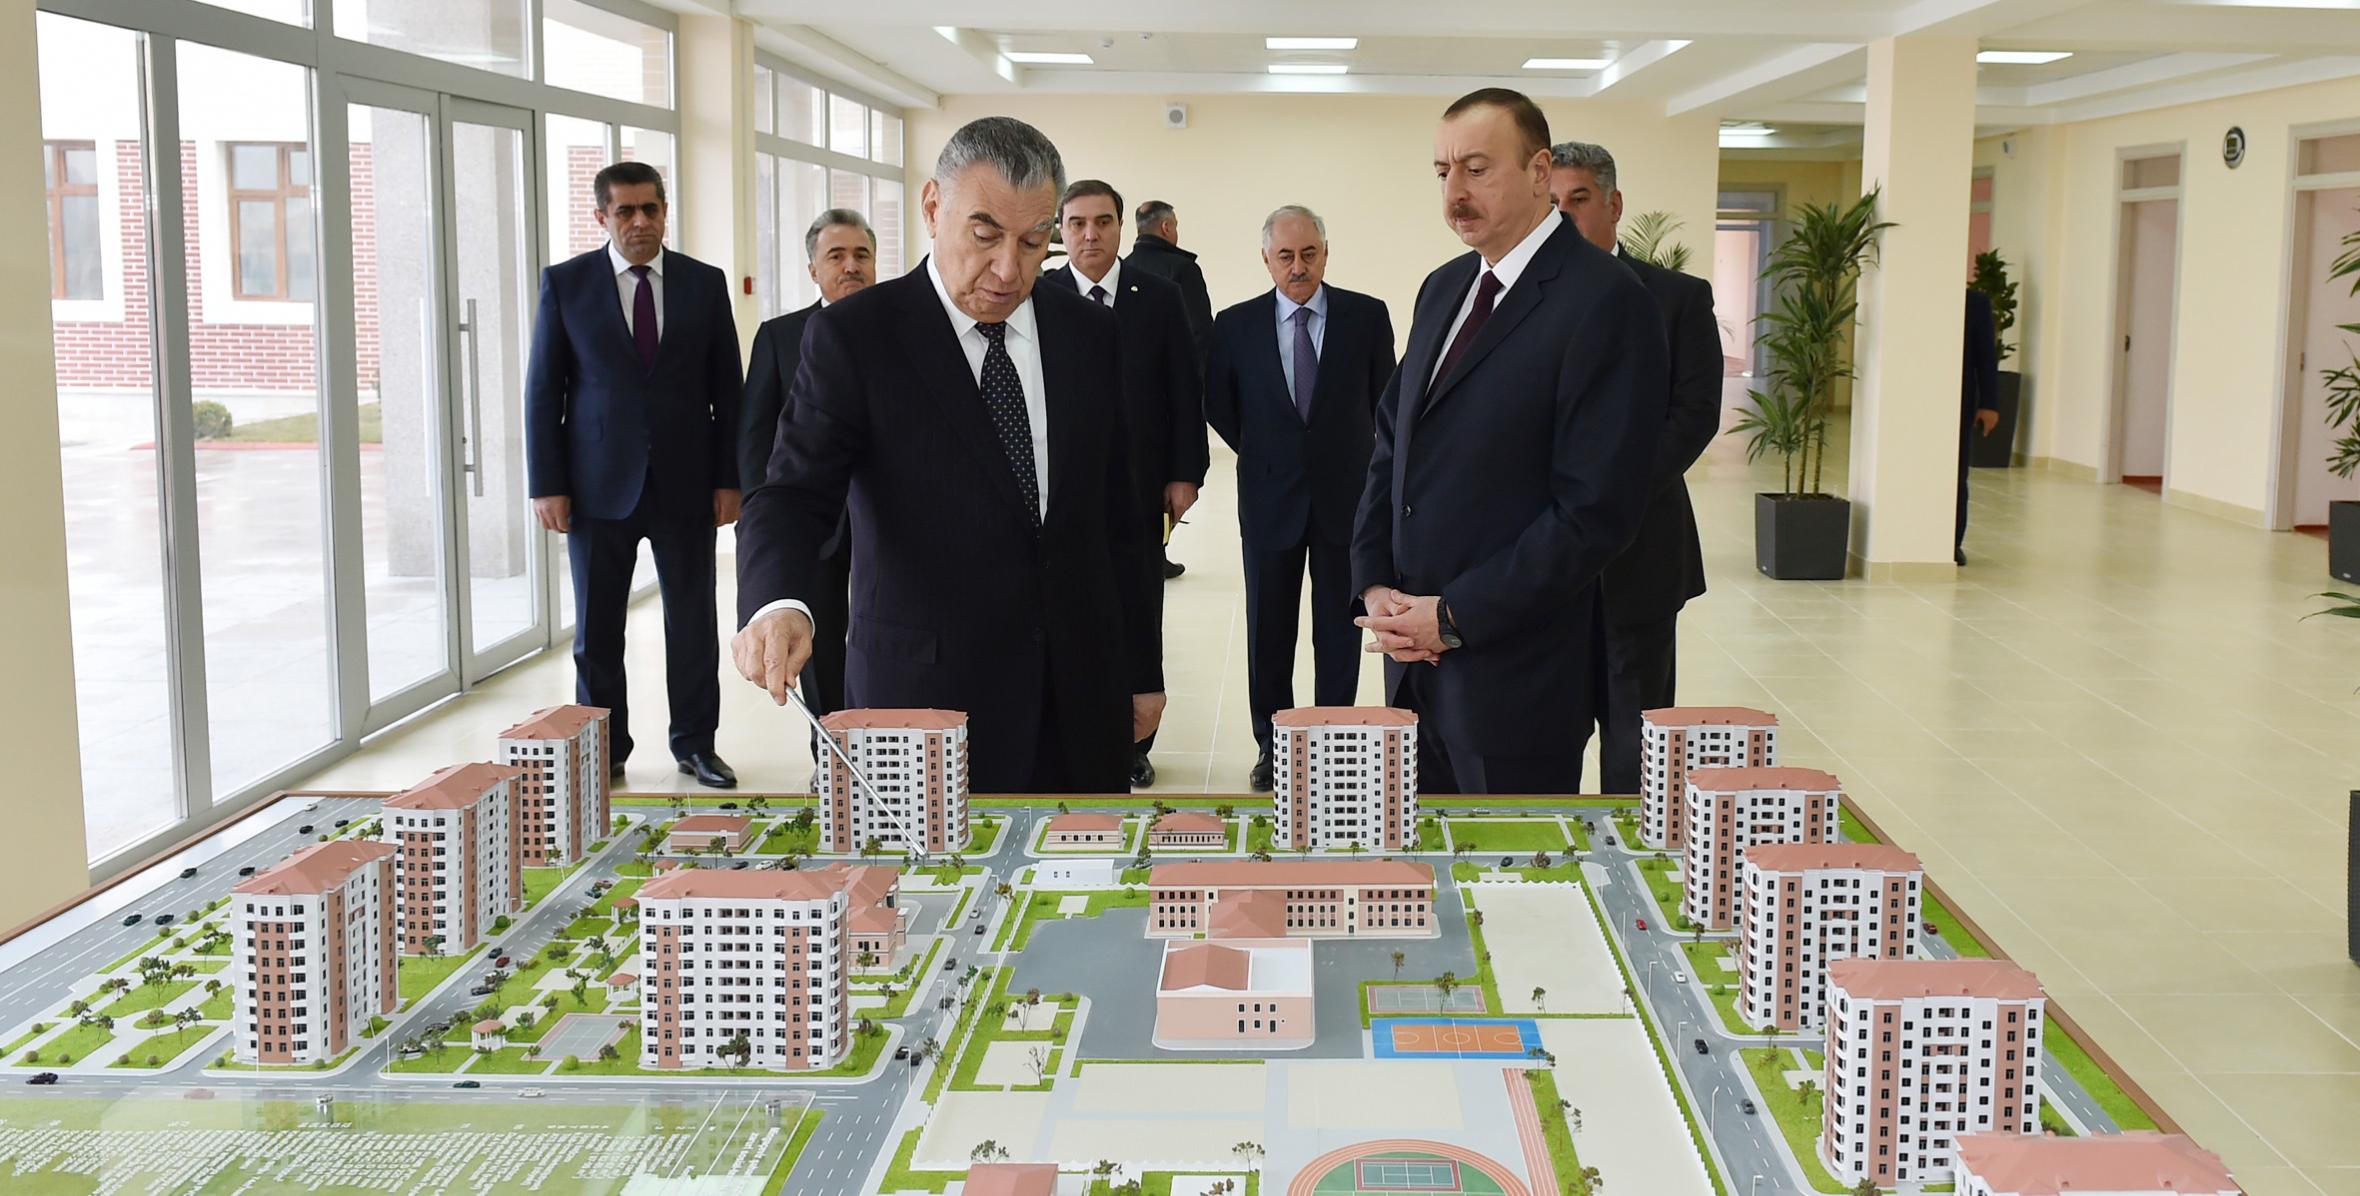 Ilham Aliyev reviewed a newly-built residential complex for IDP families in Mingachevir